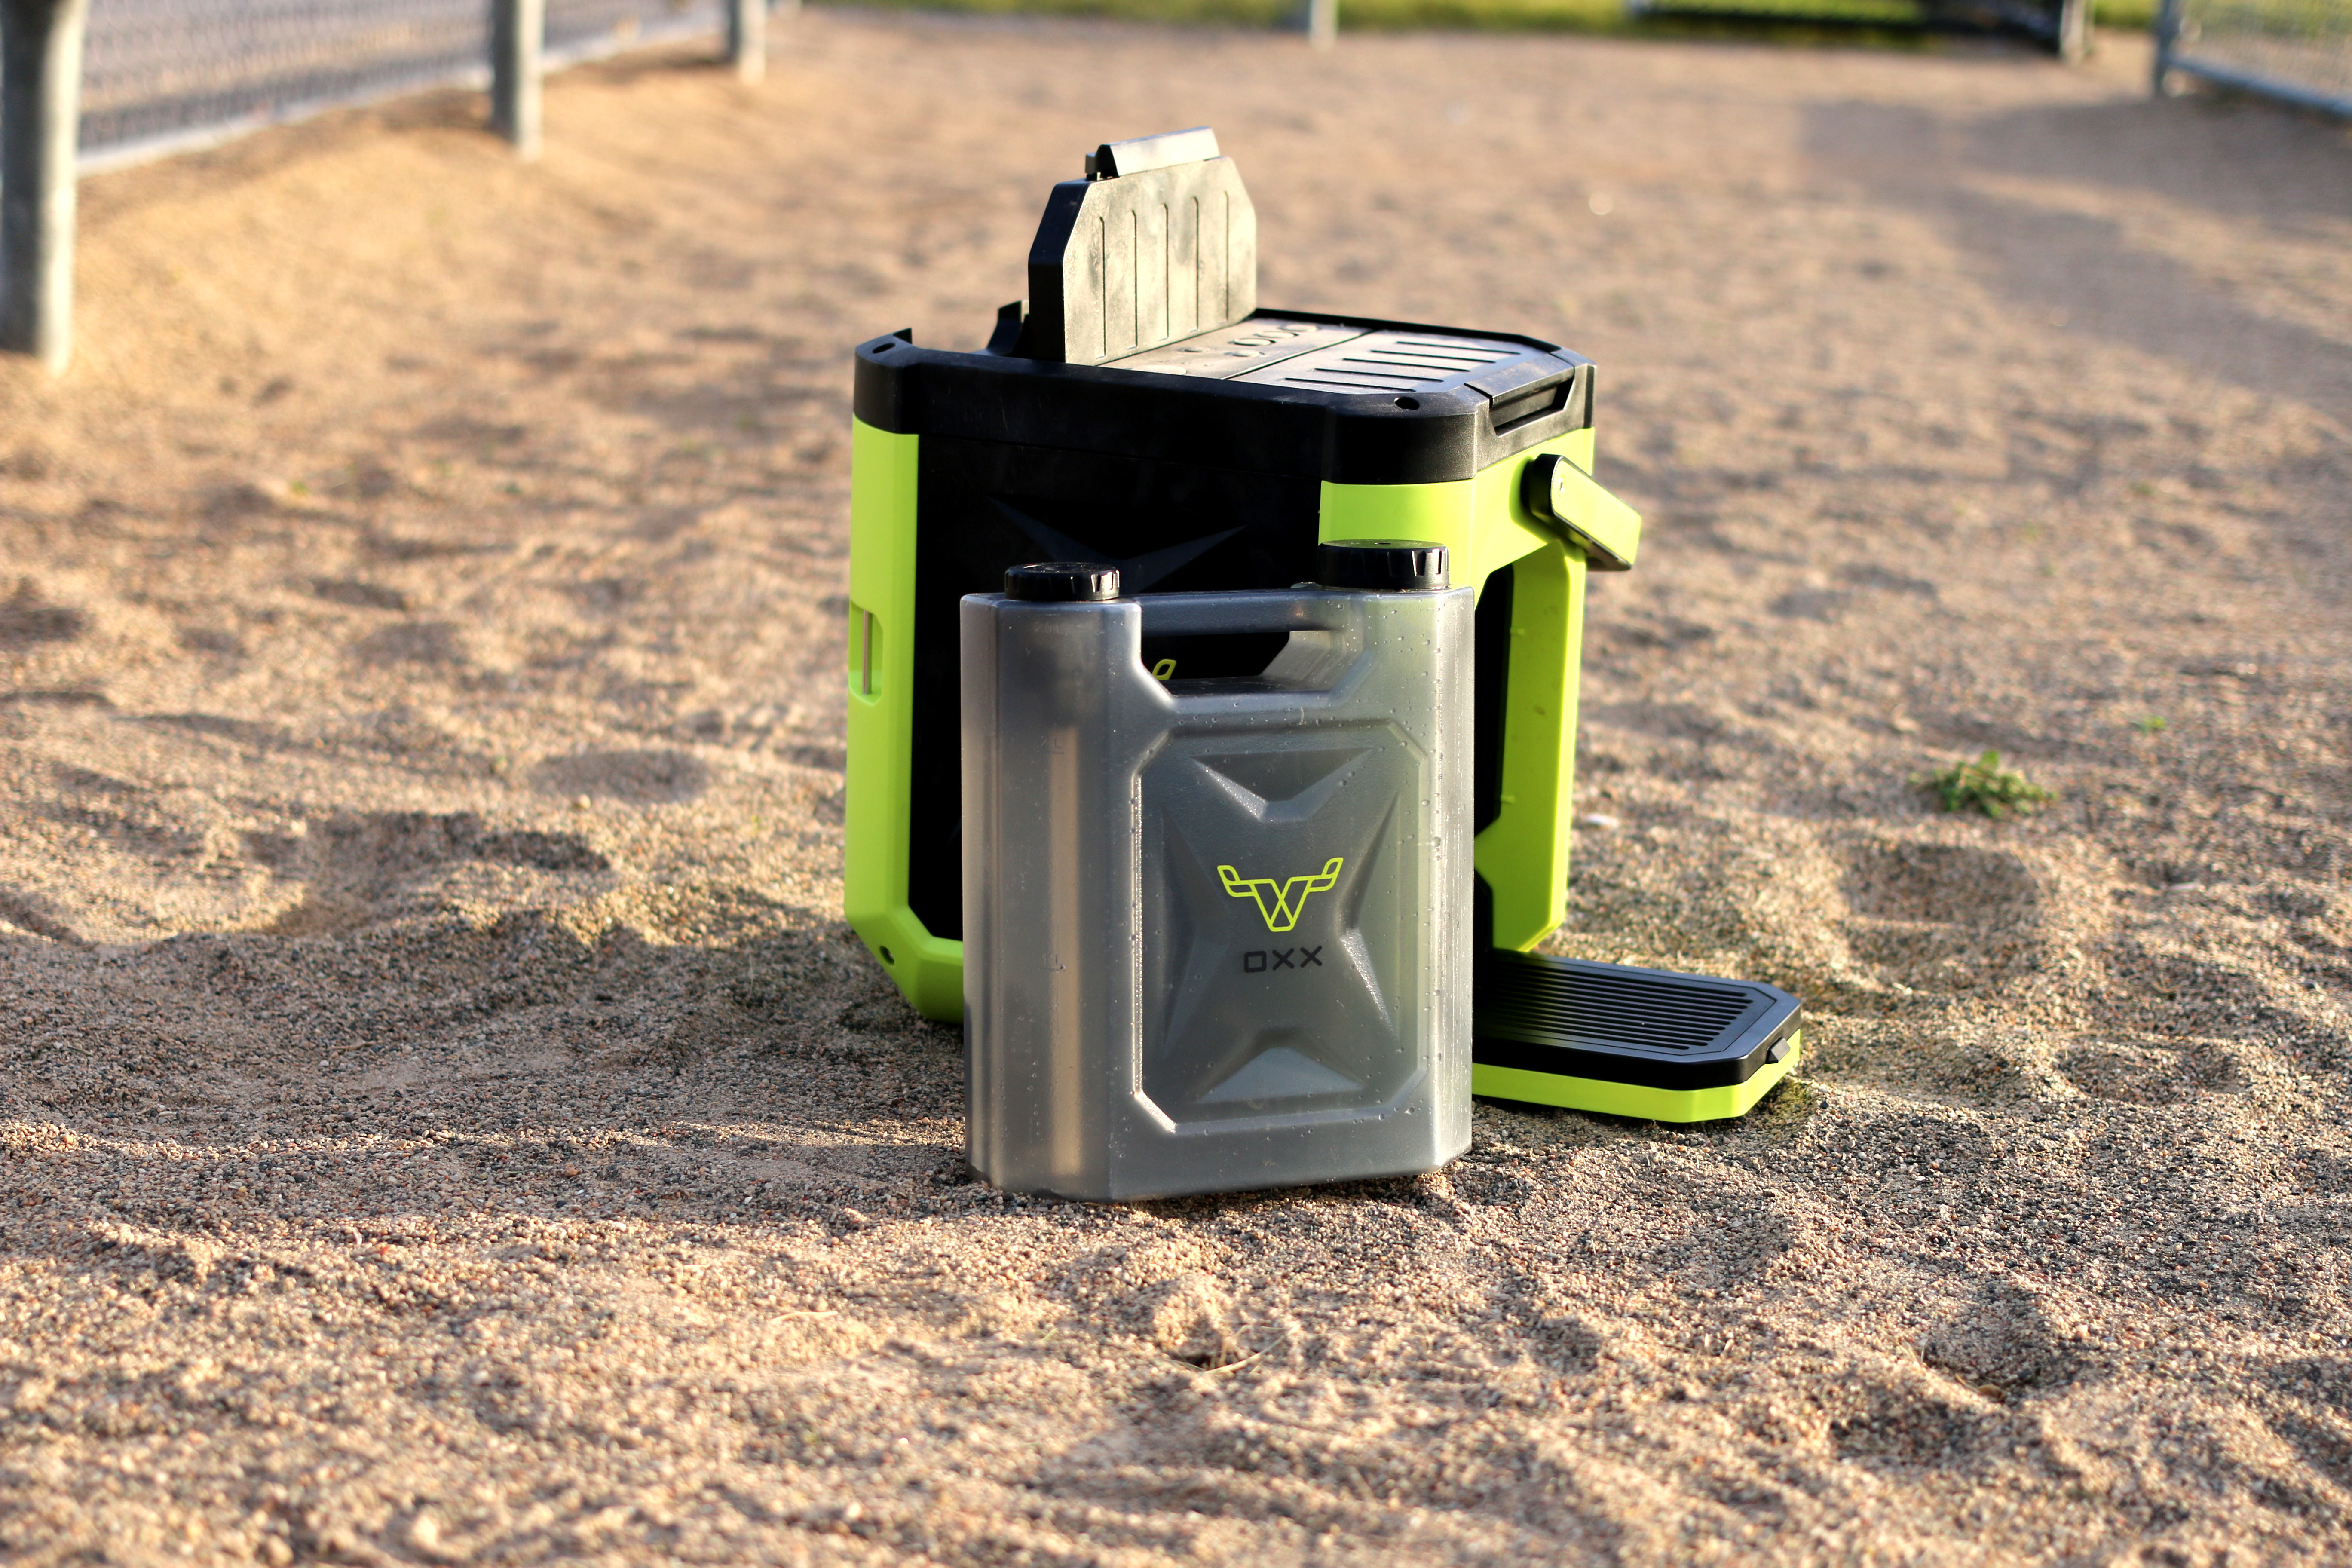 Oxx Coffeebox: The Best Camping Coffee Maker